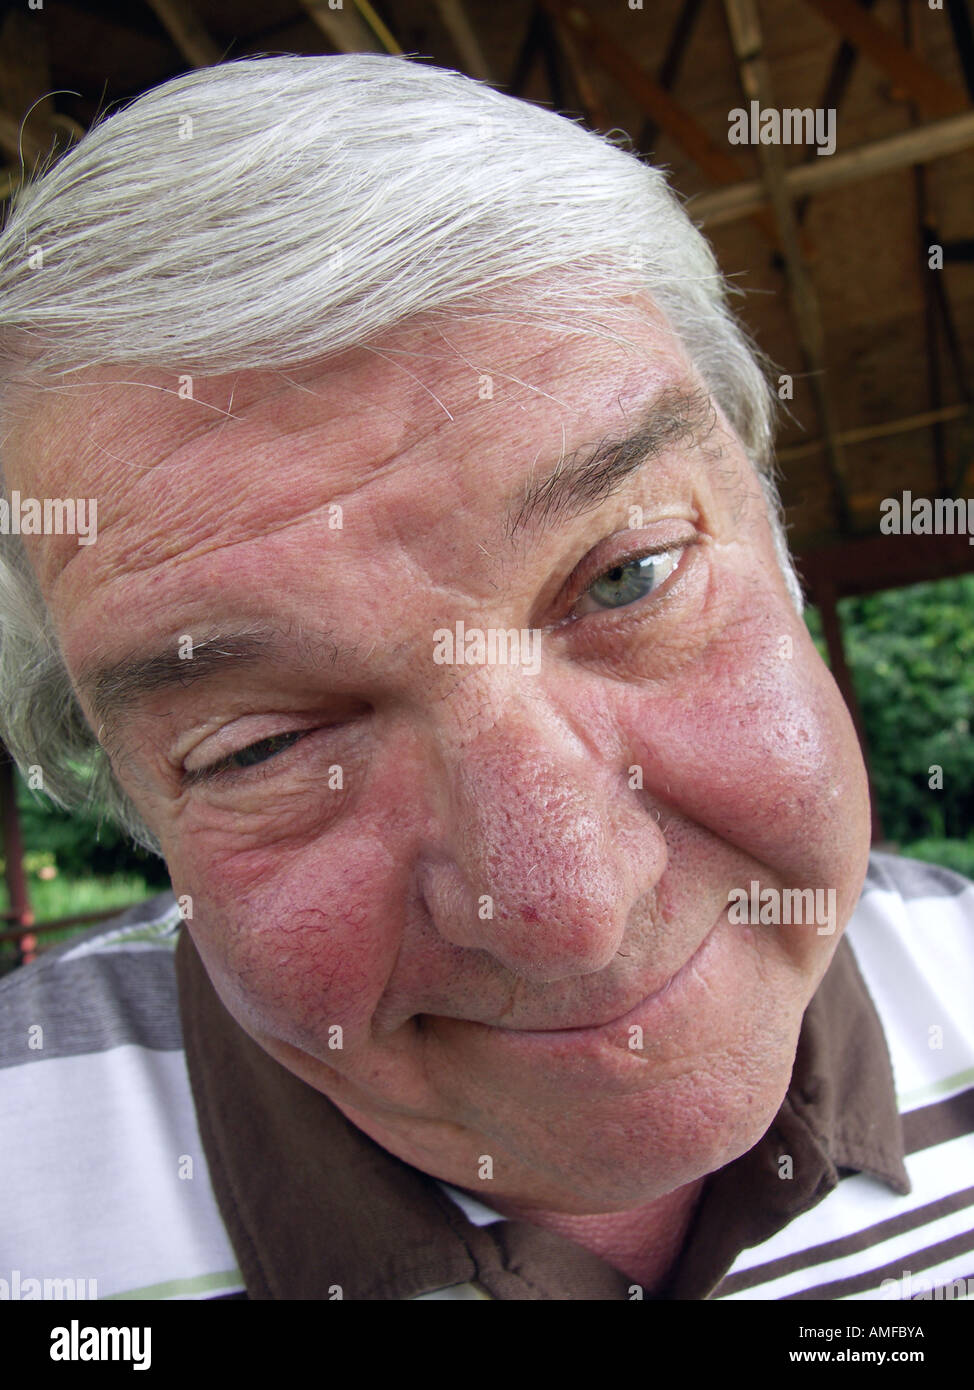 Old Man Making Funny Face Stock Photo - Alamy